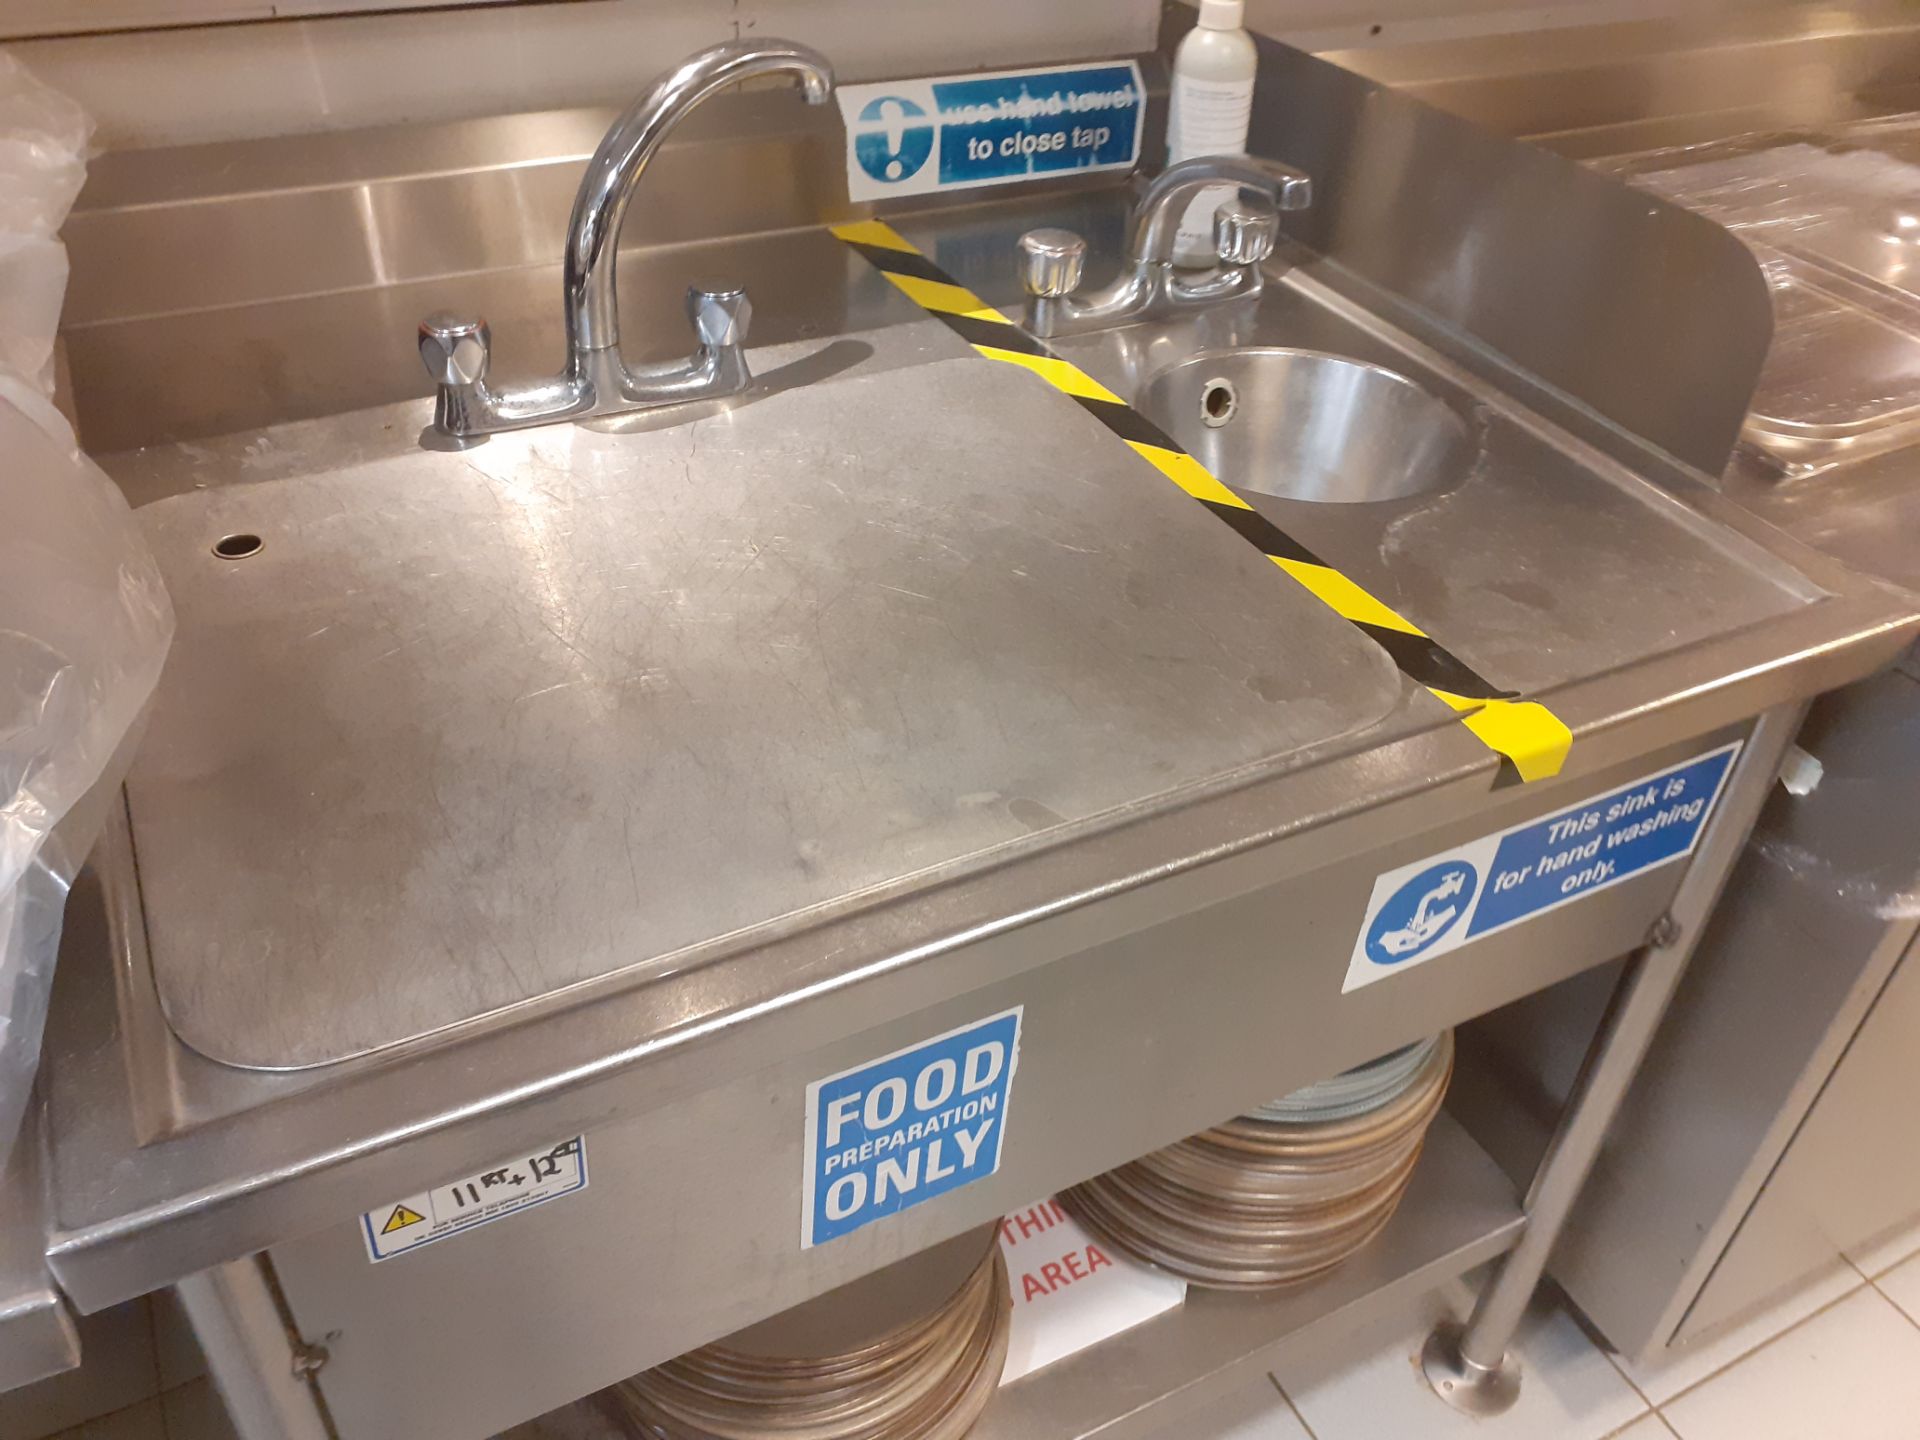 1 x Large Food Prep Sink Wash Unit With Mixer Taps and Hand Wash Basin - CL582 - Location: London - Image 4 of 6